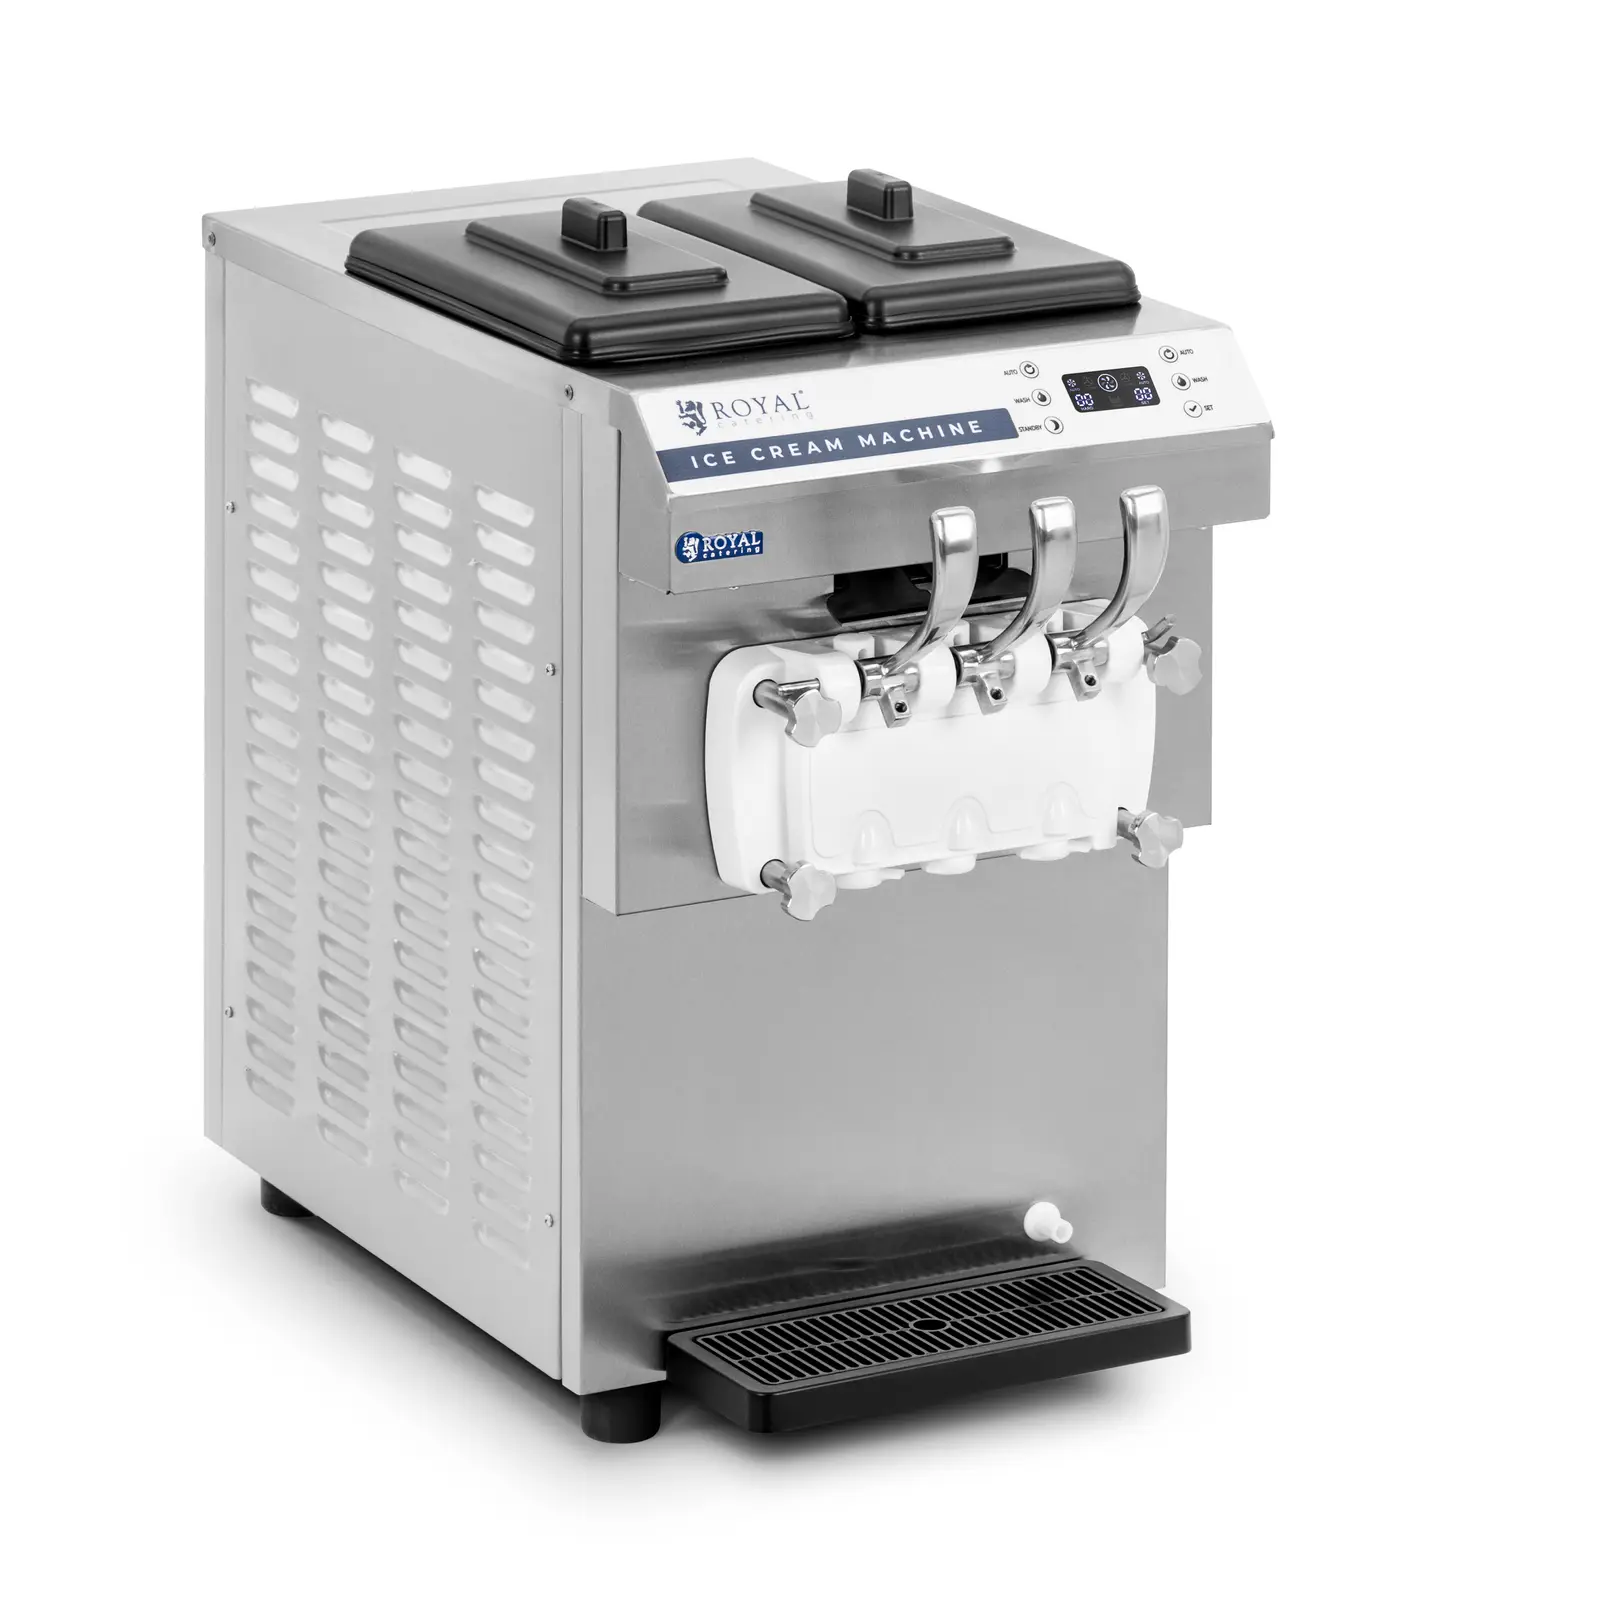 Soft Serve Ice Cream Machine - 1350 W - 16 l/h - LED - 3 flavours - Royal Catering